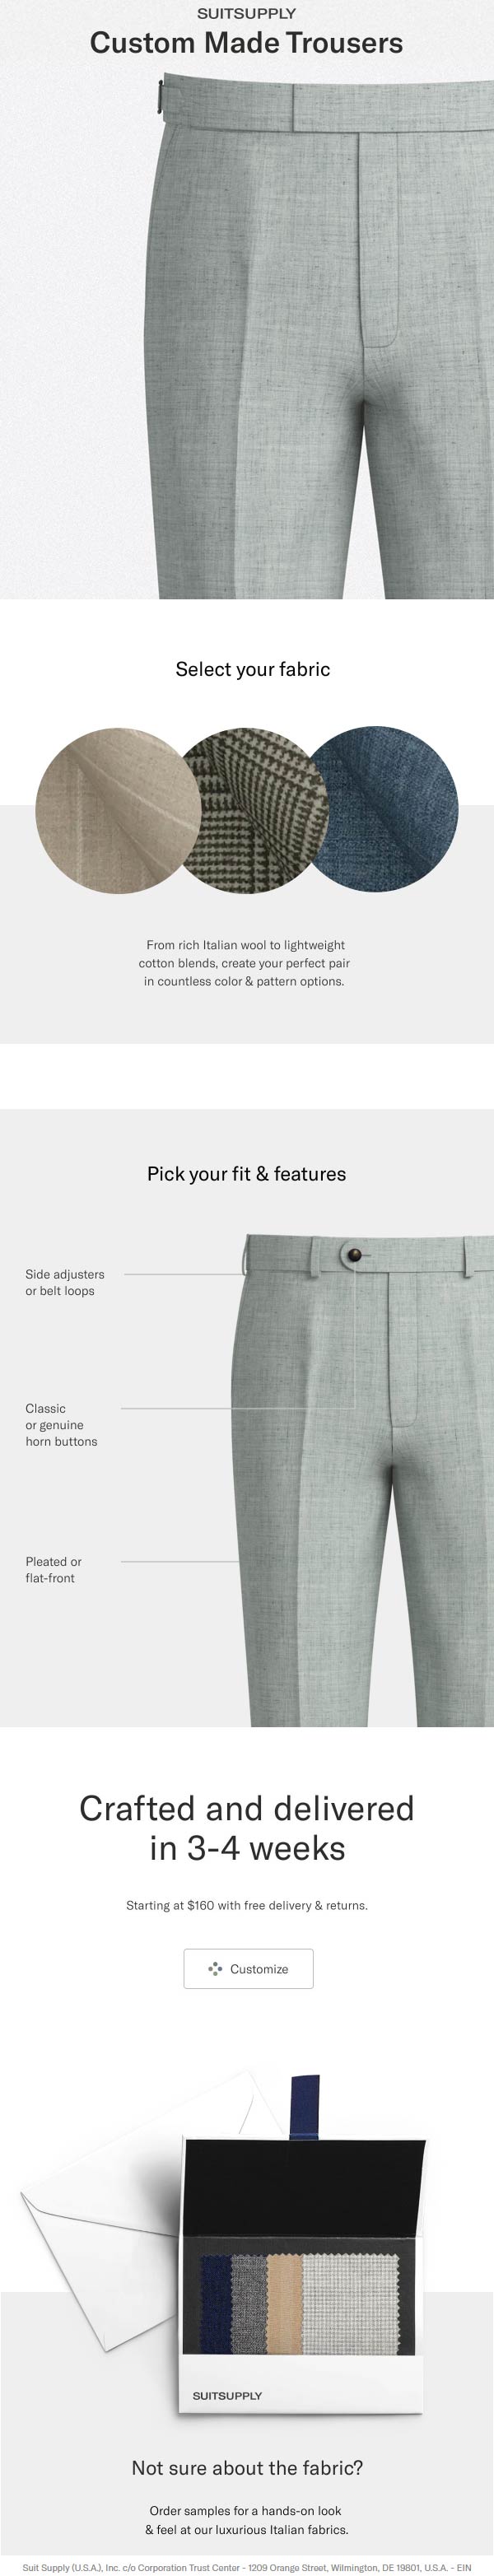 Suit Supply stores Coupon  Custom made trousers for $160 at Suit Supply #suitsupply 